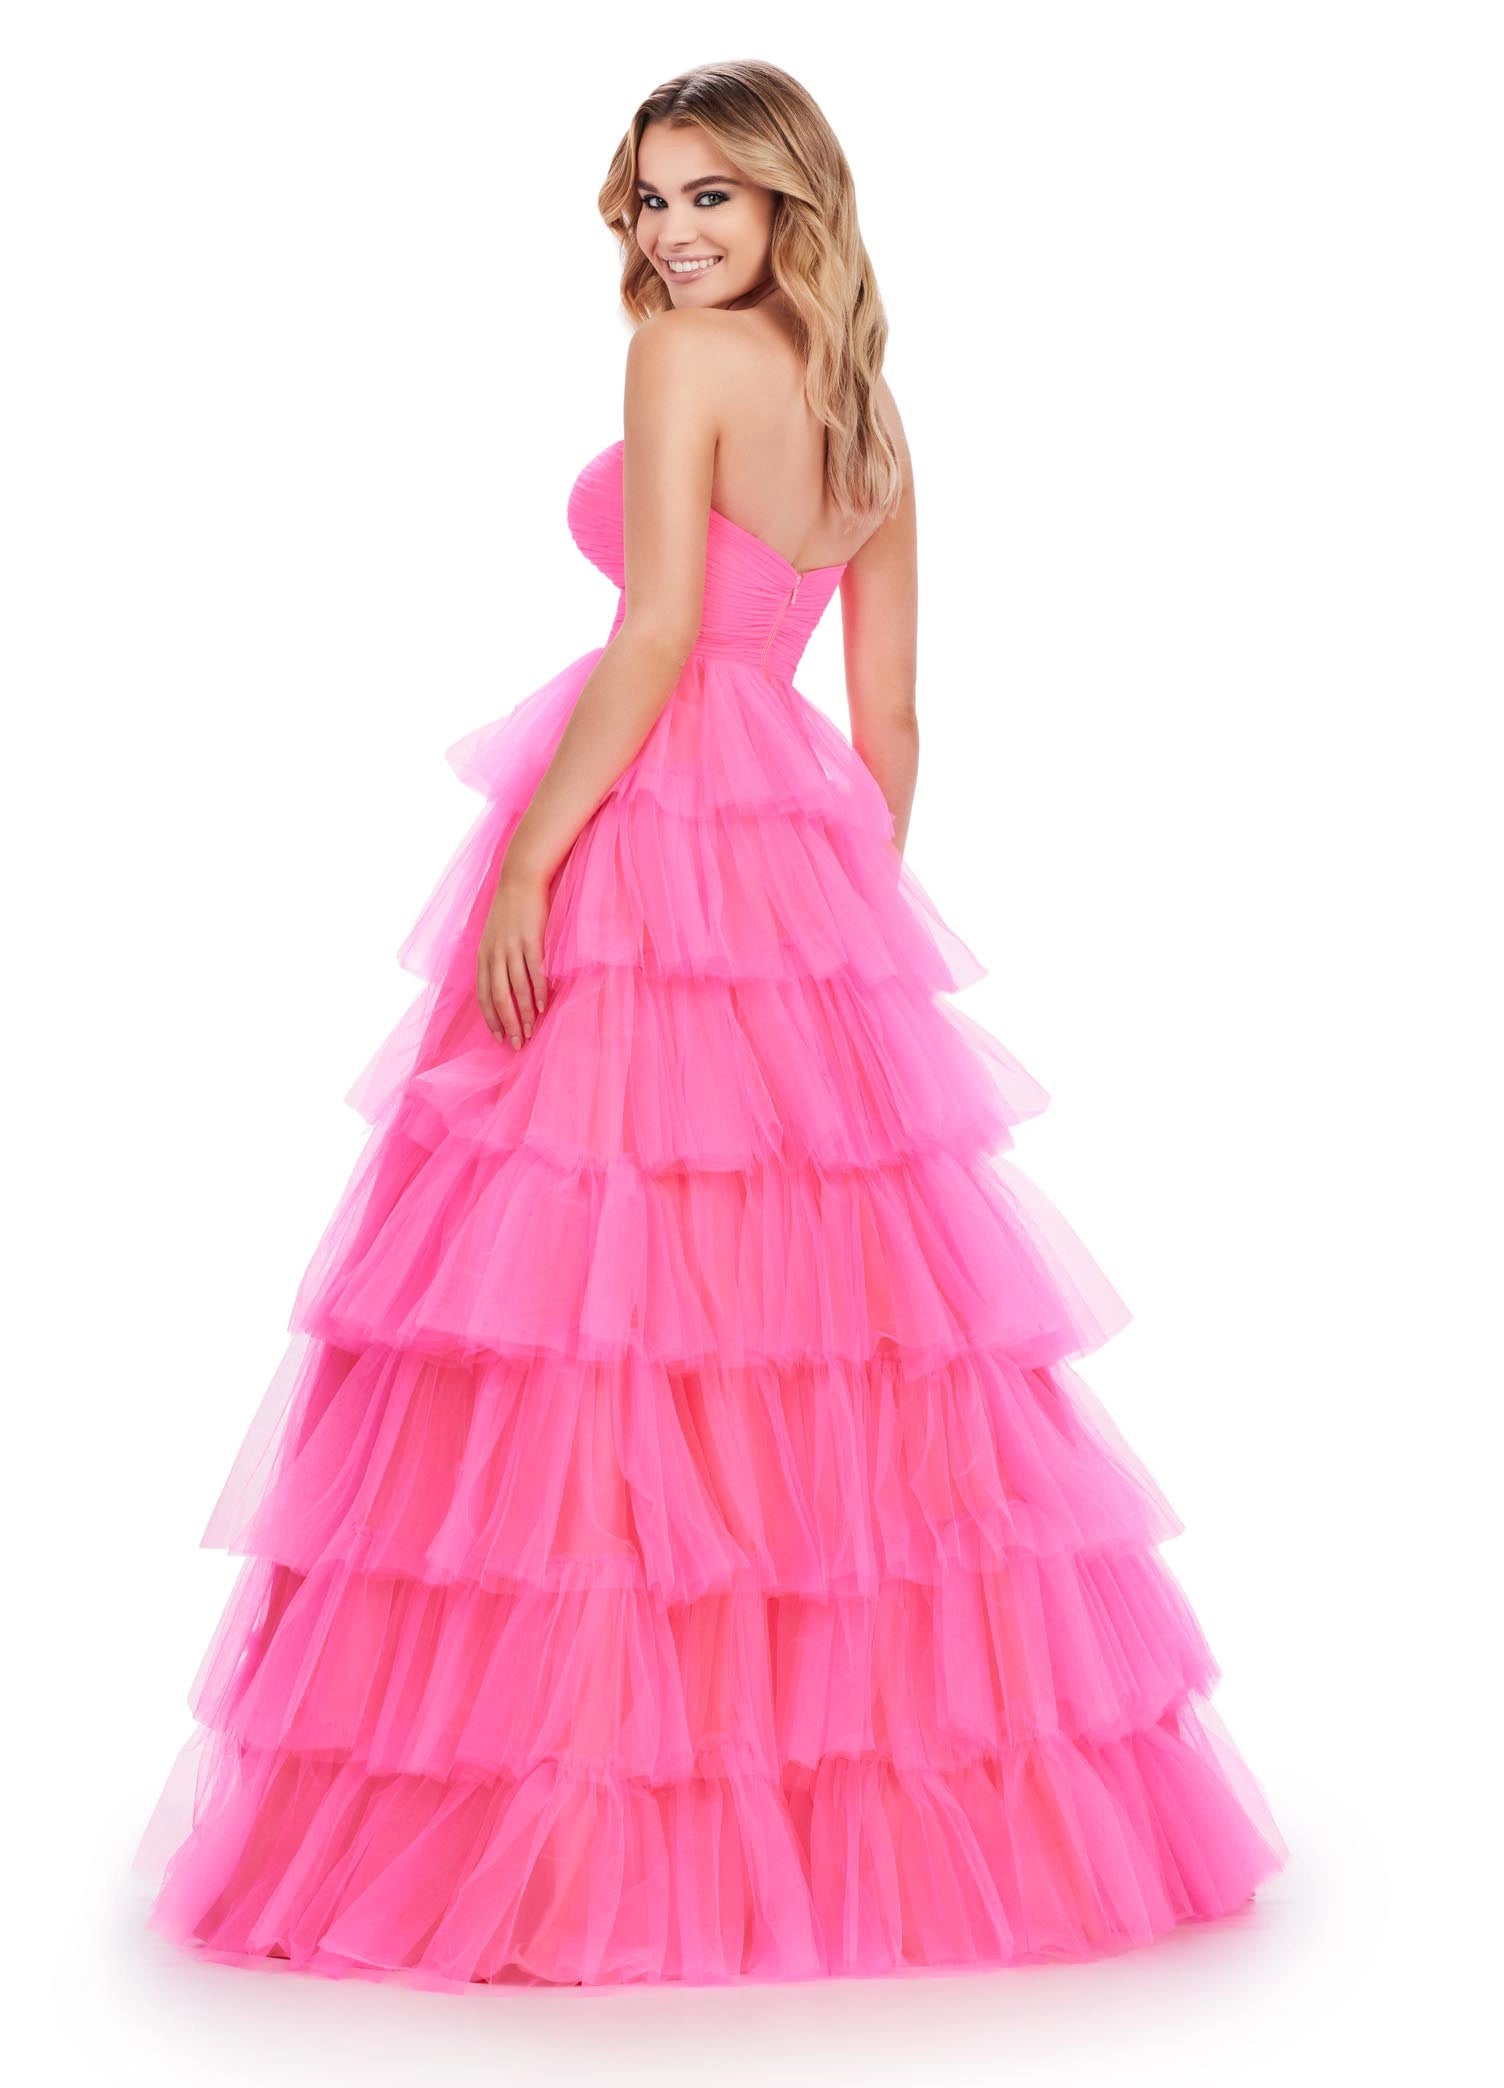 T242026_Stunning 3-in-1 Romantic Ball Gown with Detachable Swag